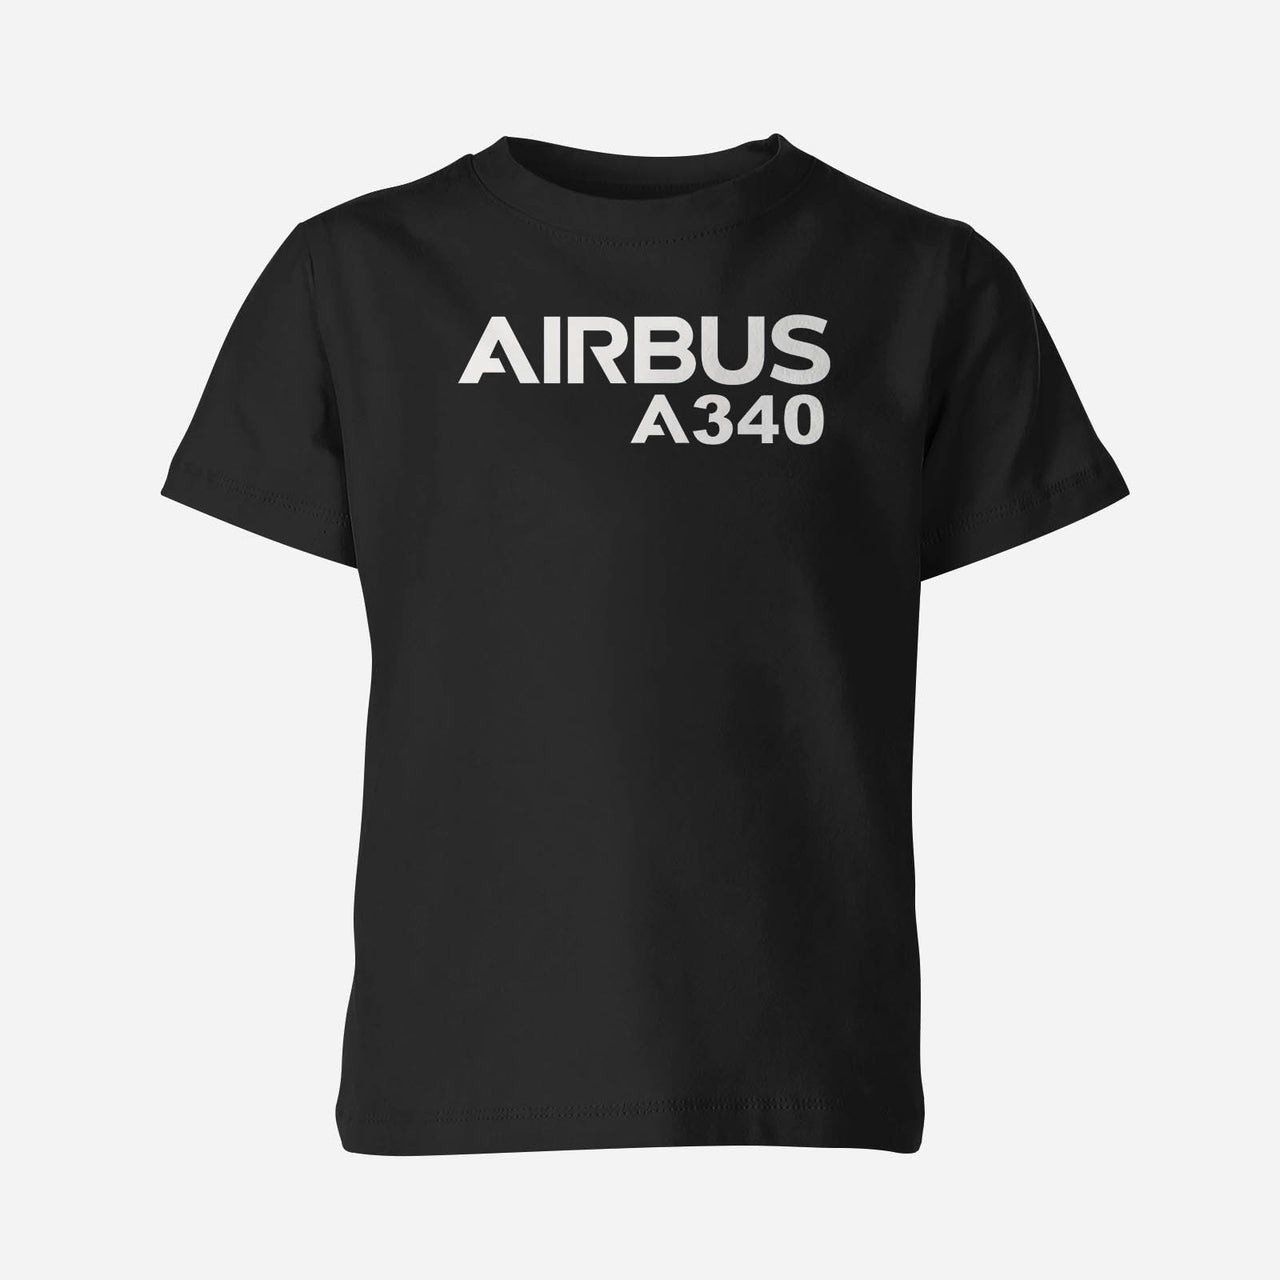 Airbus A340 & Text Designed Children T-Shirts